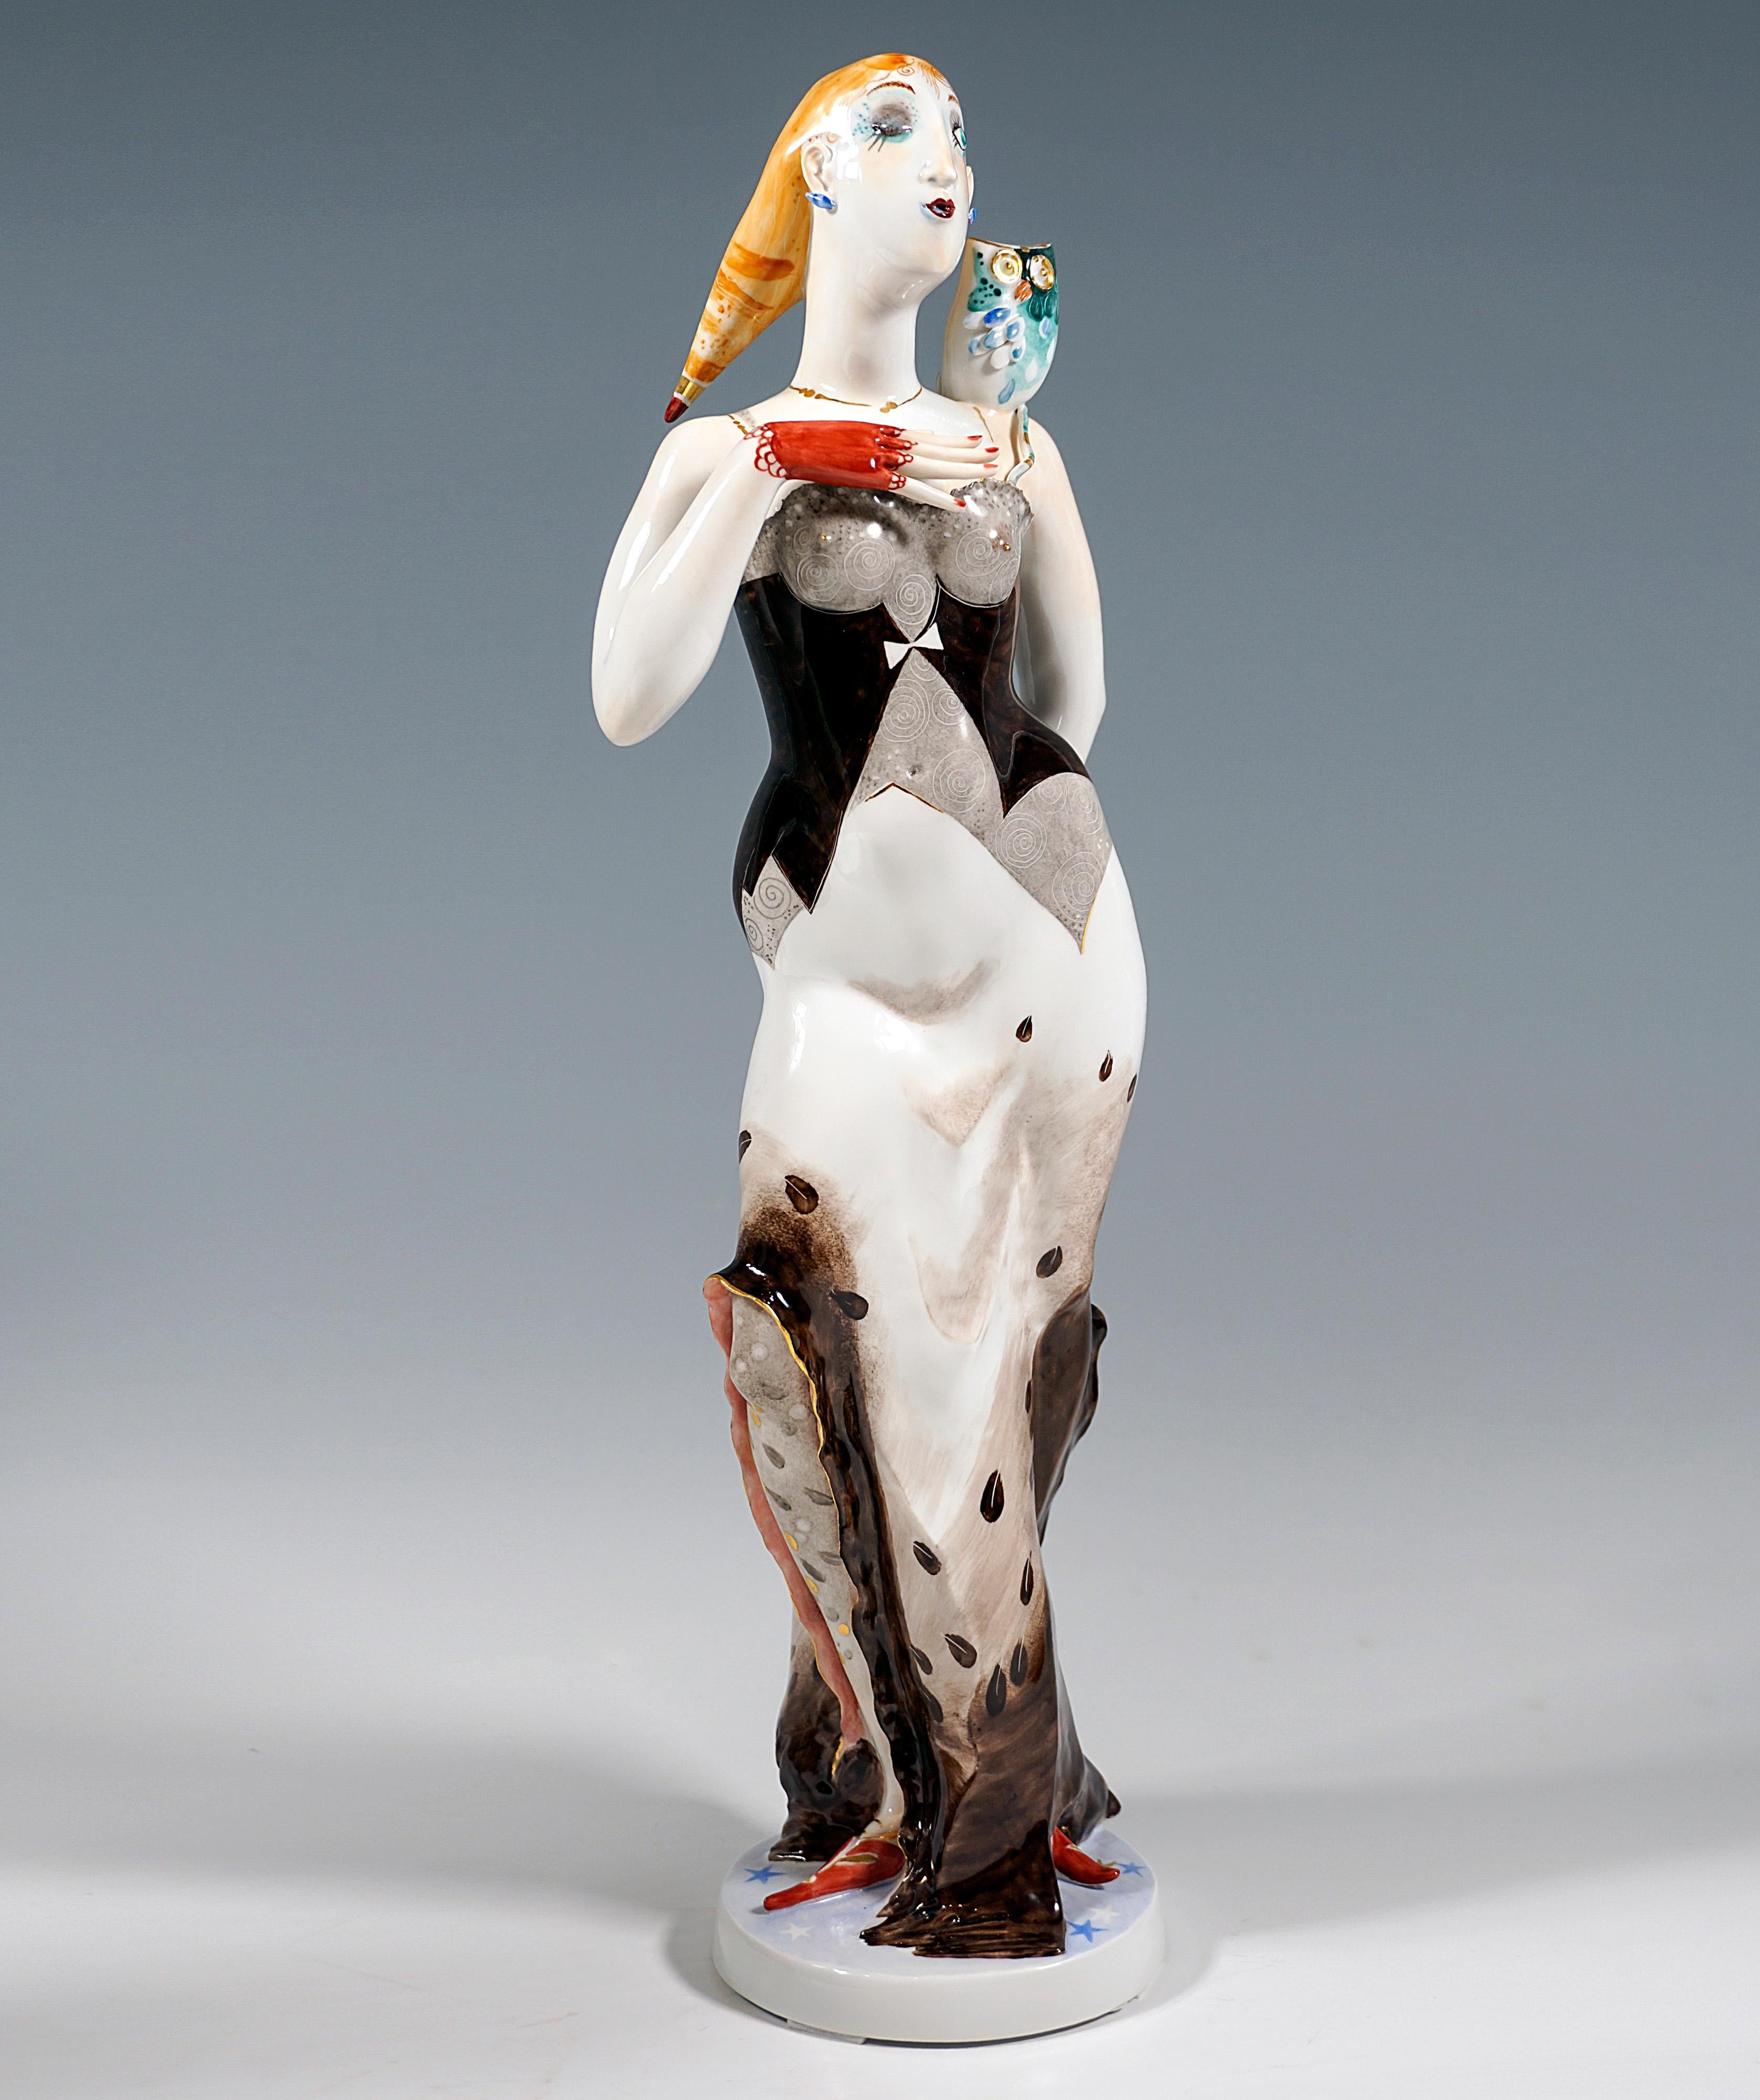 Porcelain Meissen Large Pair of Allegory Figurines Day & Night by Silvia Kloede, Ca 2007 For Sale